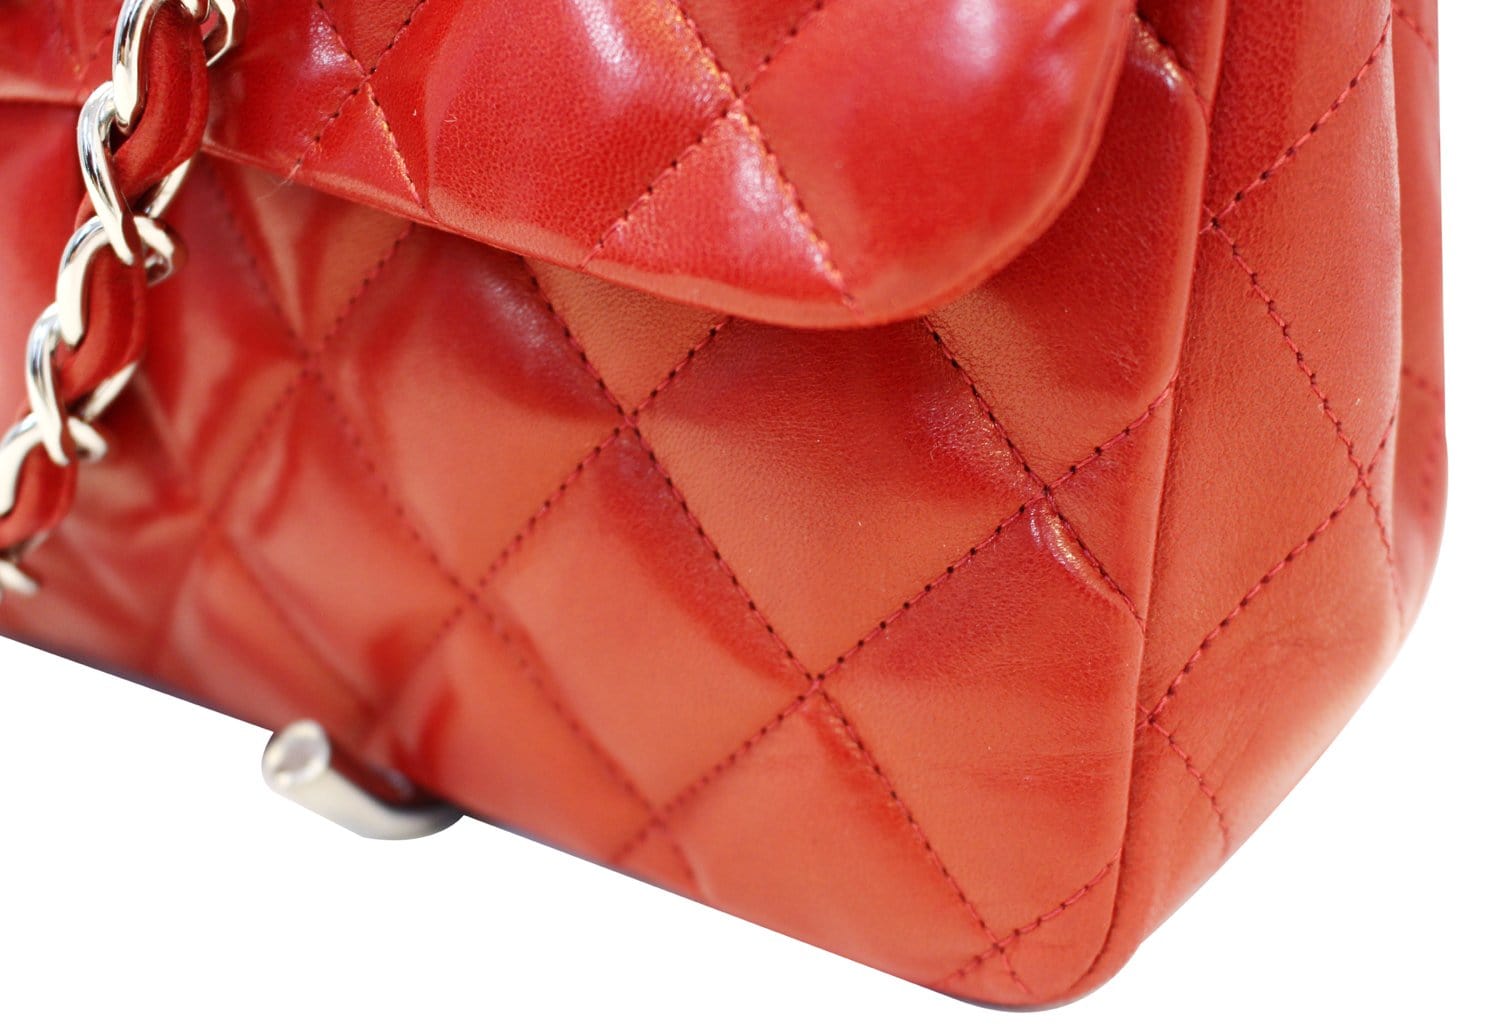 CHANEL Lambskin Quilted Medium Double Flap Red 1315027